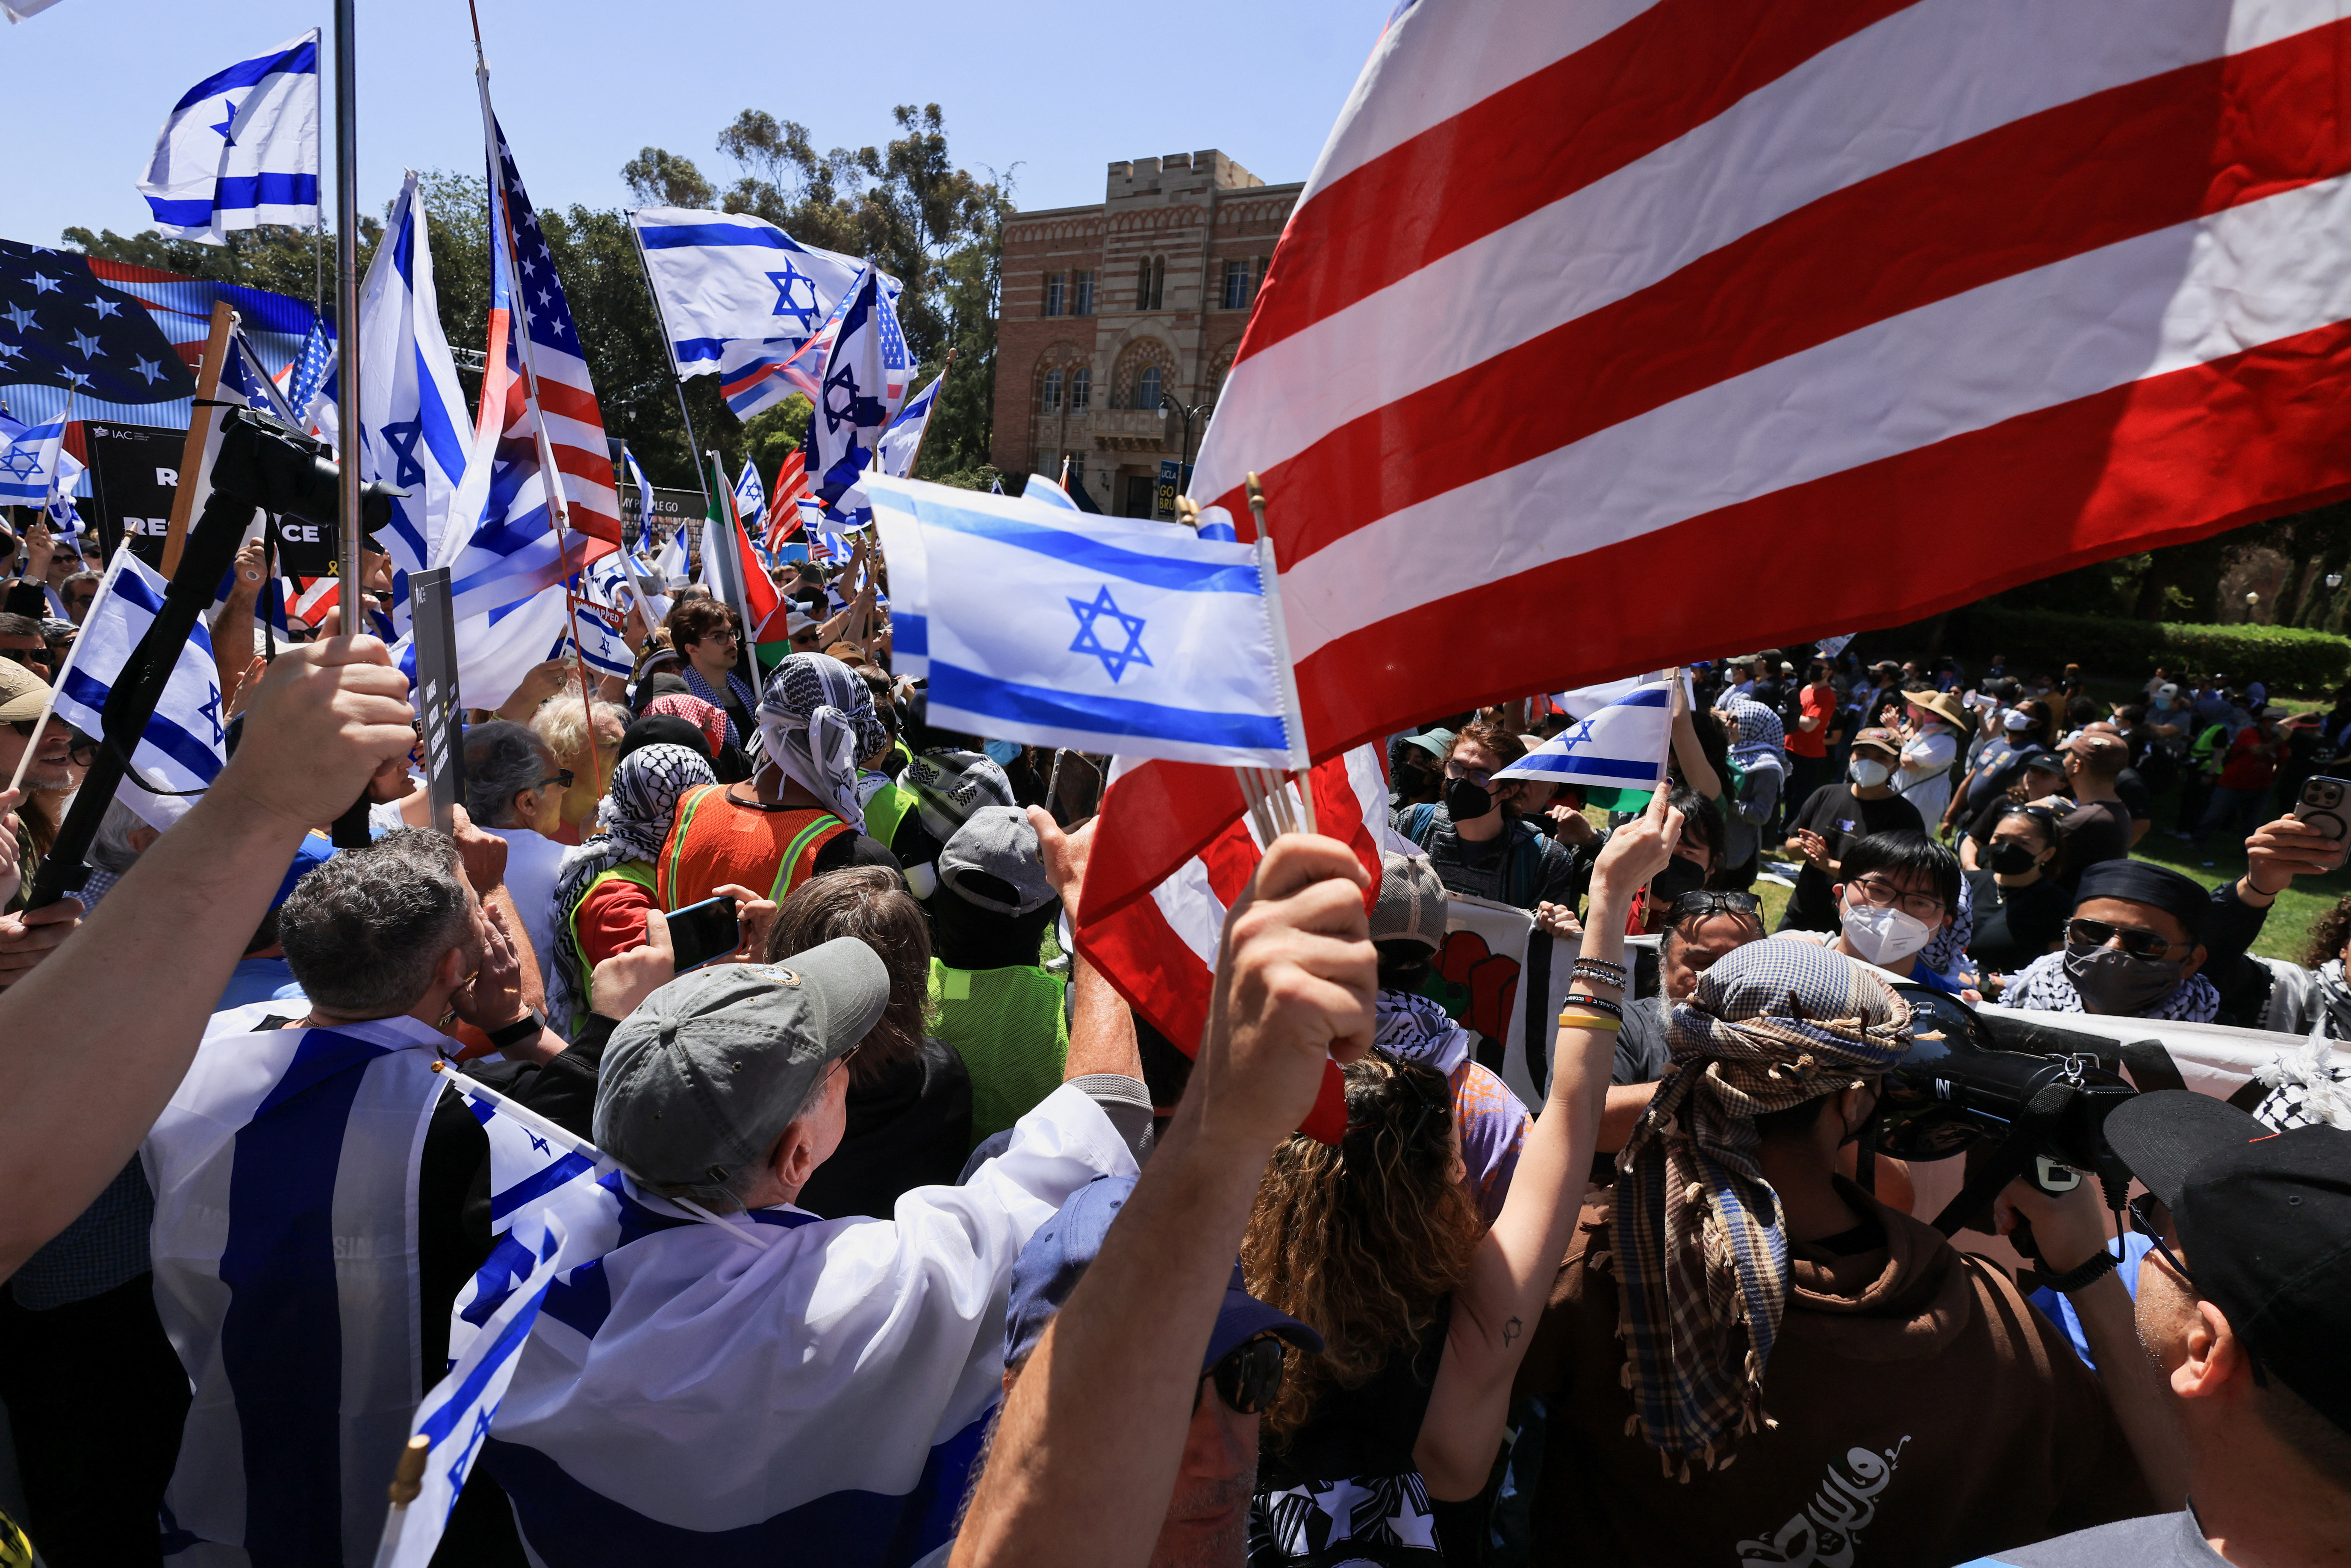 Pro-Israel counter-protesters gather during a demonstration in support of Palestinians at UCLA in Los Angeles on April 28.